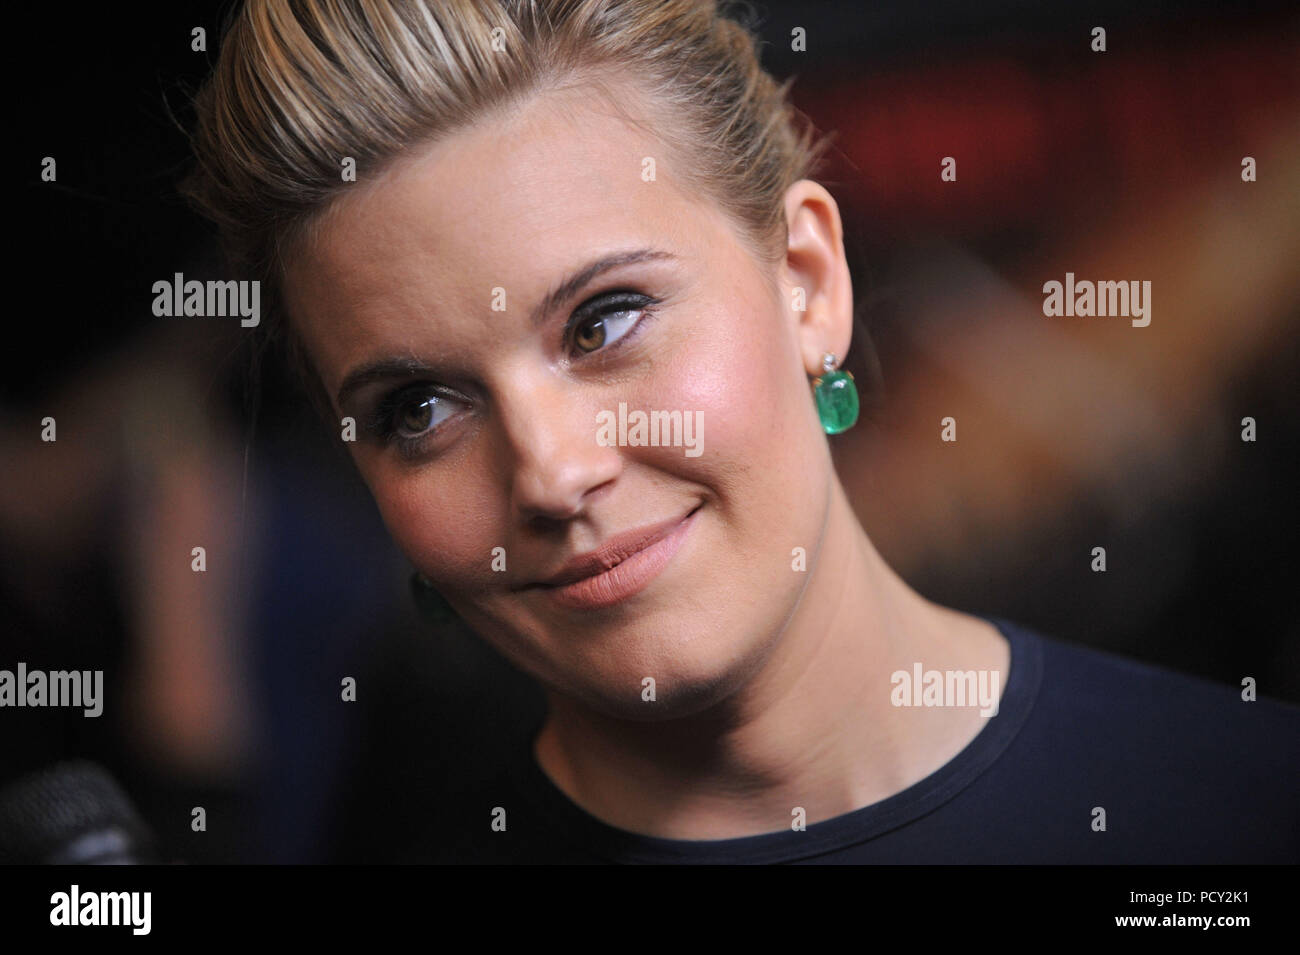 NEW YORK, NY - JANUARY 07: Maggie Grace  attends the 'Taken 3' Fan Event Screening at AMC Empire 25 theater on January 7, 2015 in New York City.   People:  Maggie Grace Stock Photo